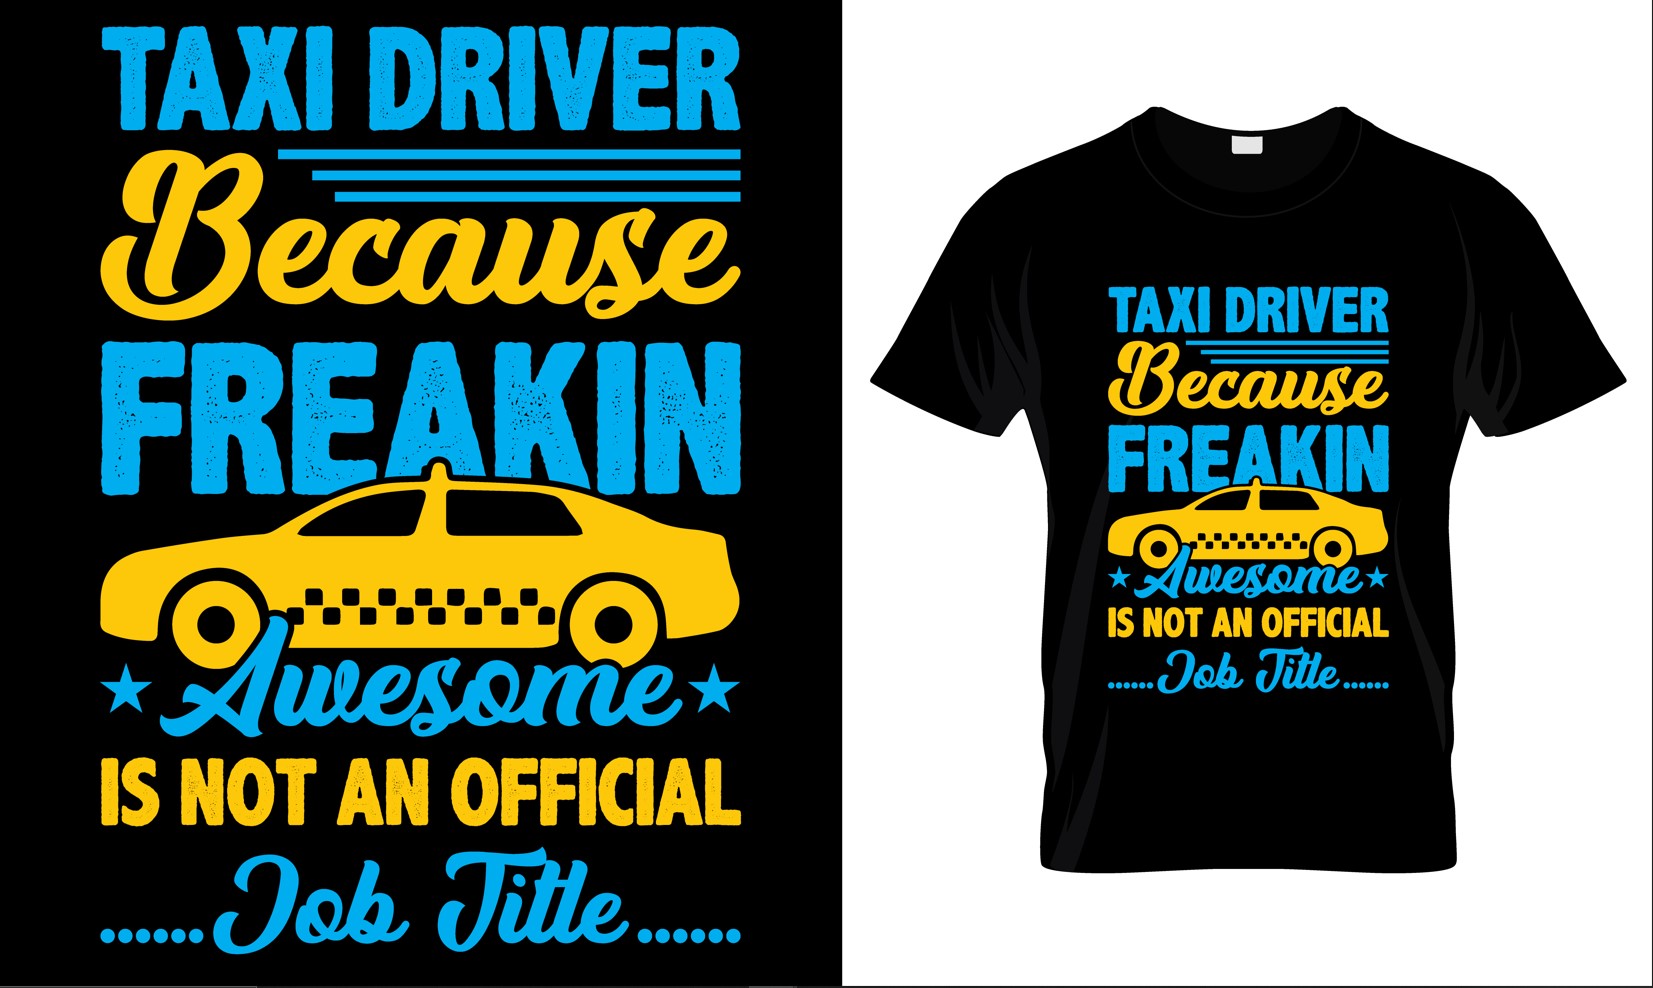 Image of a T-shirt with a beautiful taxi print and lettering